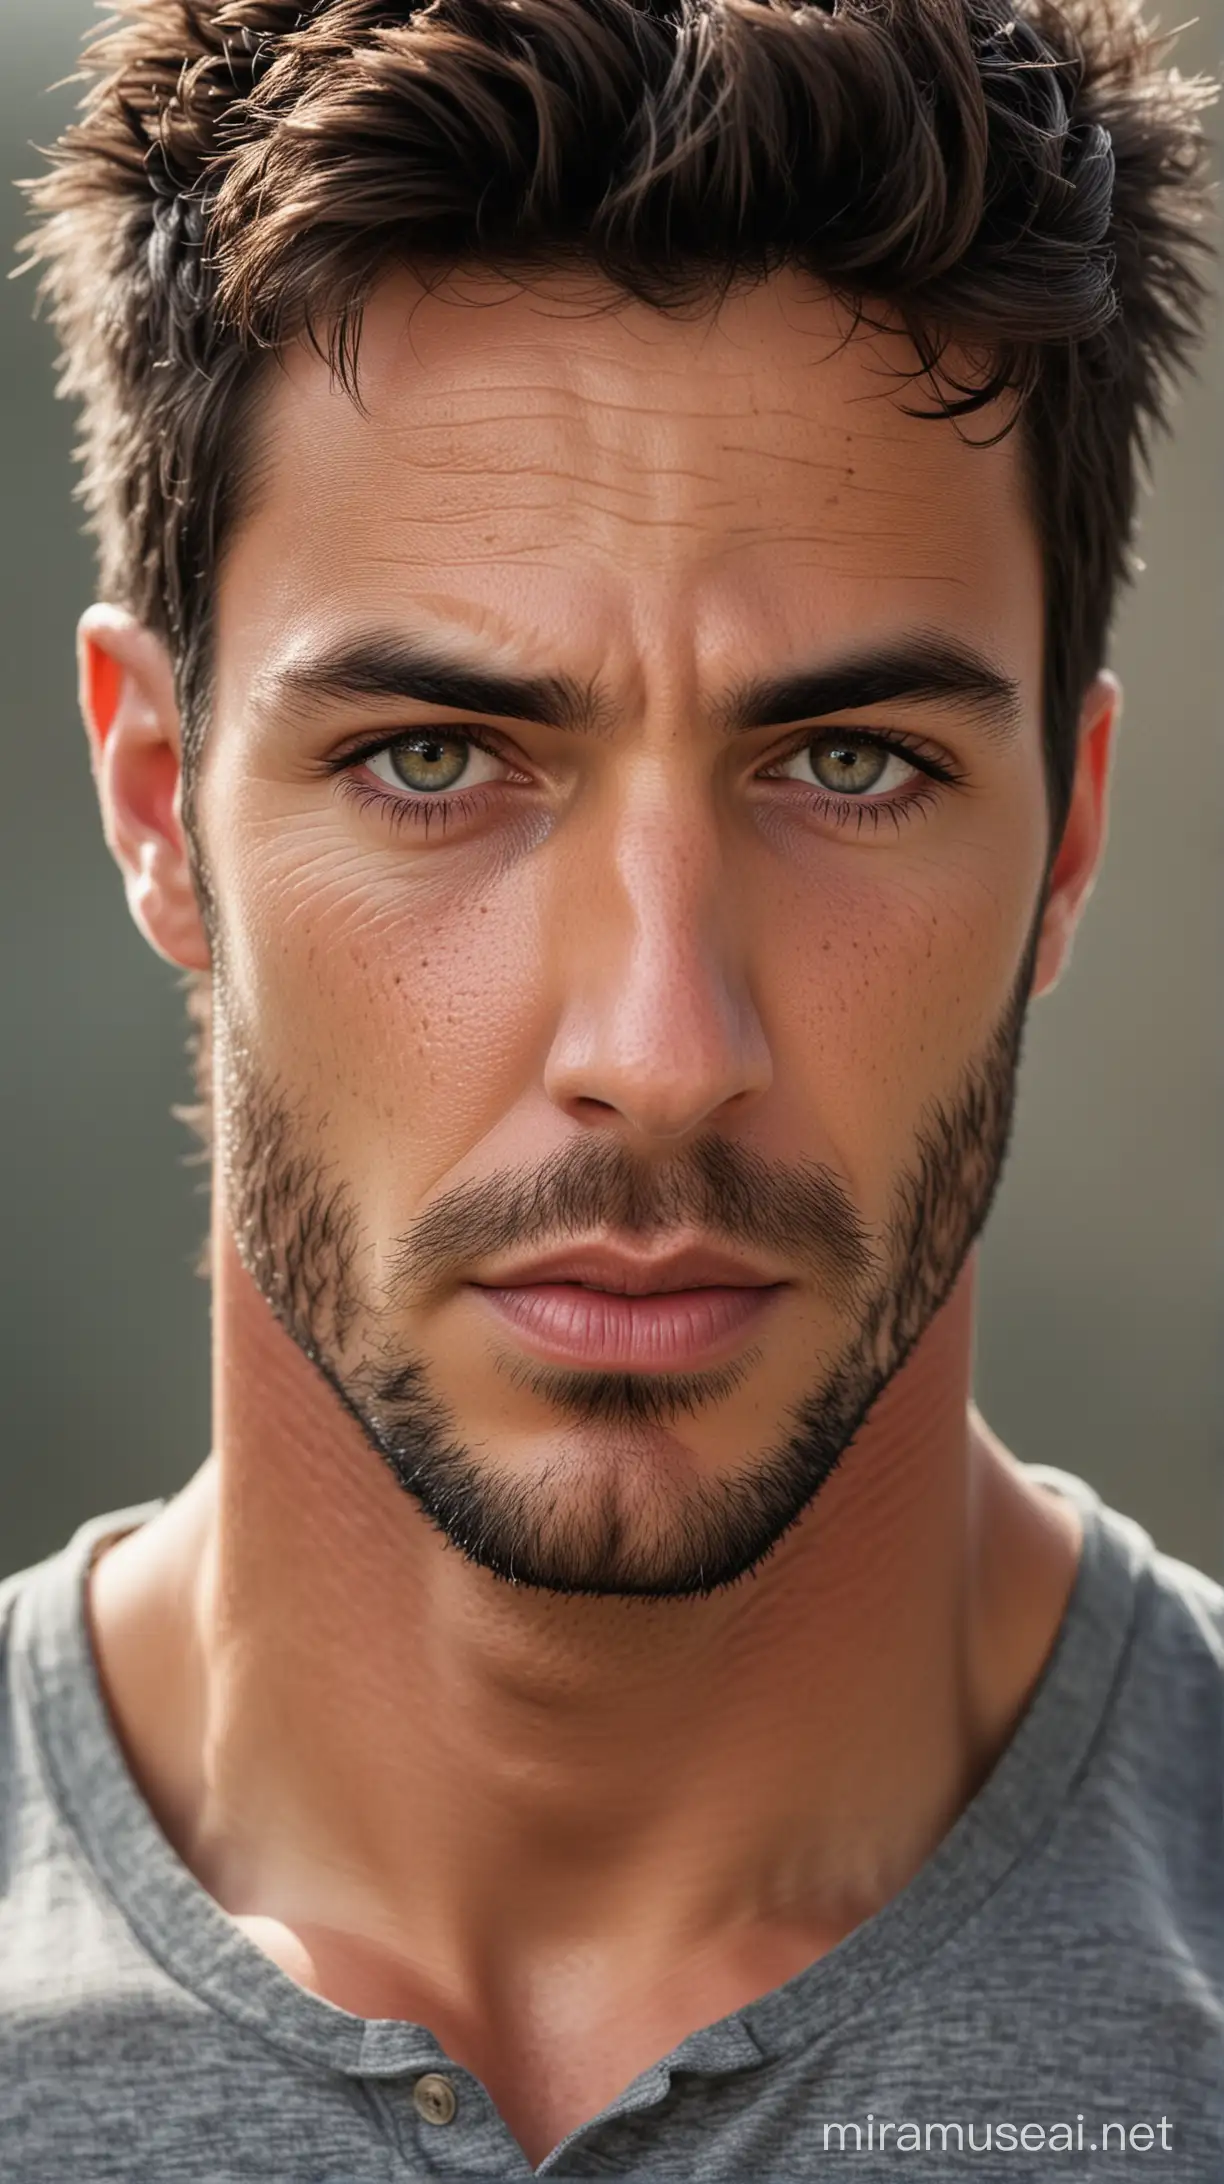  A rugged man with a strong jawline and piercing eyes stares straight ahead, his expression serious yet determined. His short, dark hair is neatly trimmed, framing his chiseled features. There's a hint of stubble on his square jaw, adding to his rugged charm. His broad shoulders and defined muscles are evident even through the simple, fitted shirt he wears. When he speaks, his voice carries a deep, commanding tone, resonating with strength and confidence.